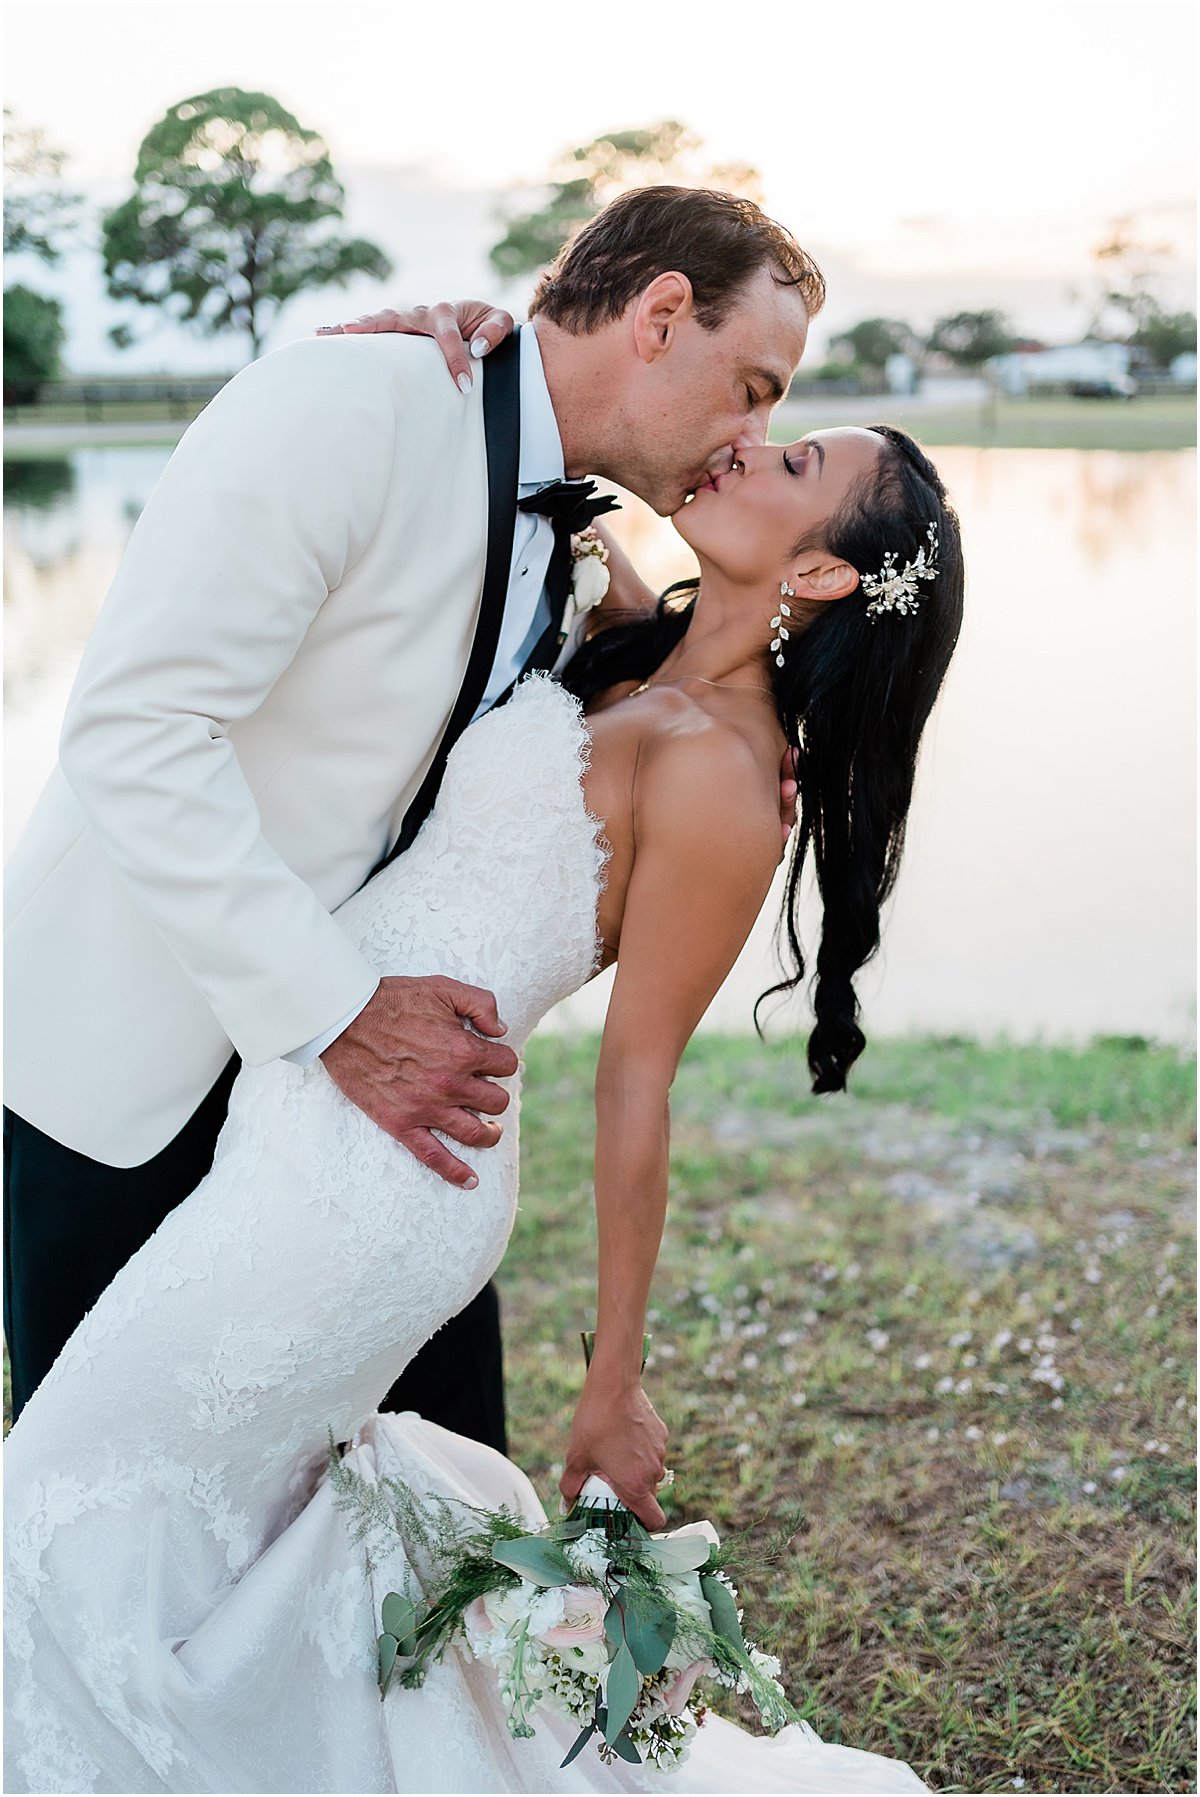 Rustic and Relaxed Wedding | Ever After Farms | Jupiter Florida | Married in Palm Beach | www.marriedinpalmbeach.com | Rivers Photo and Video